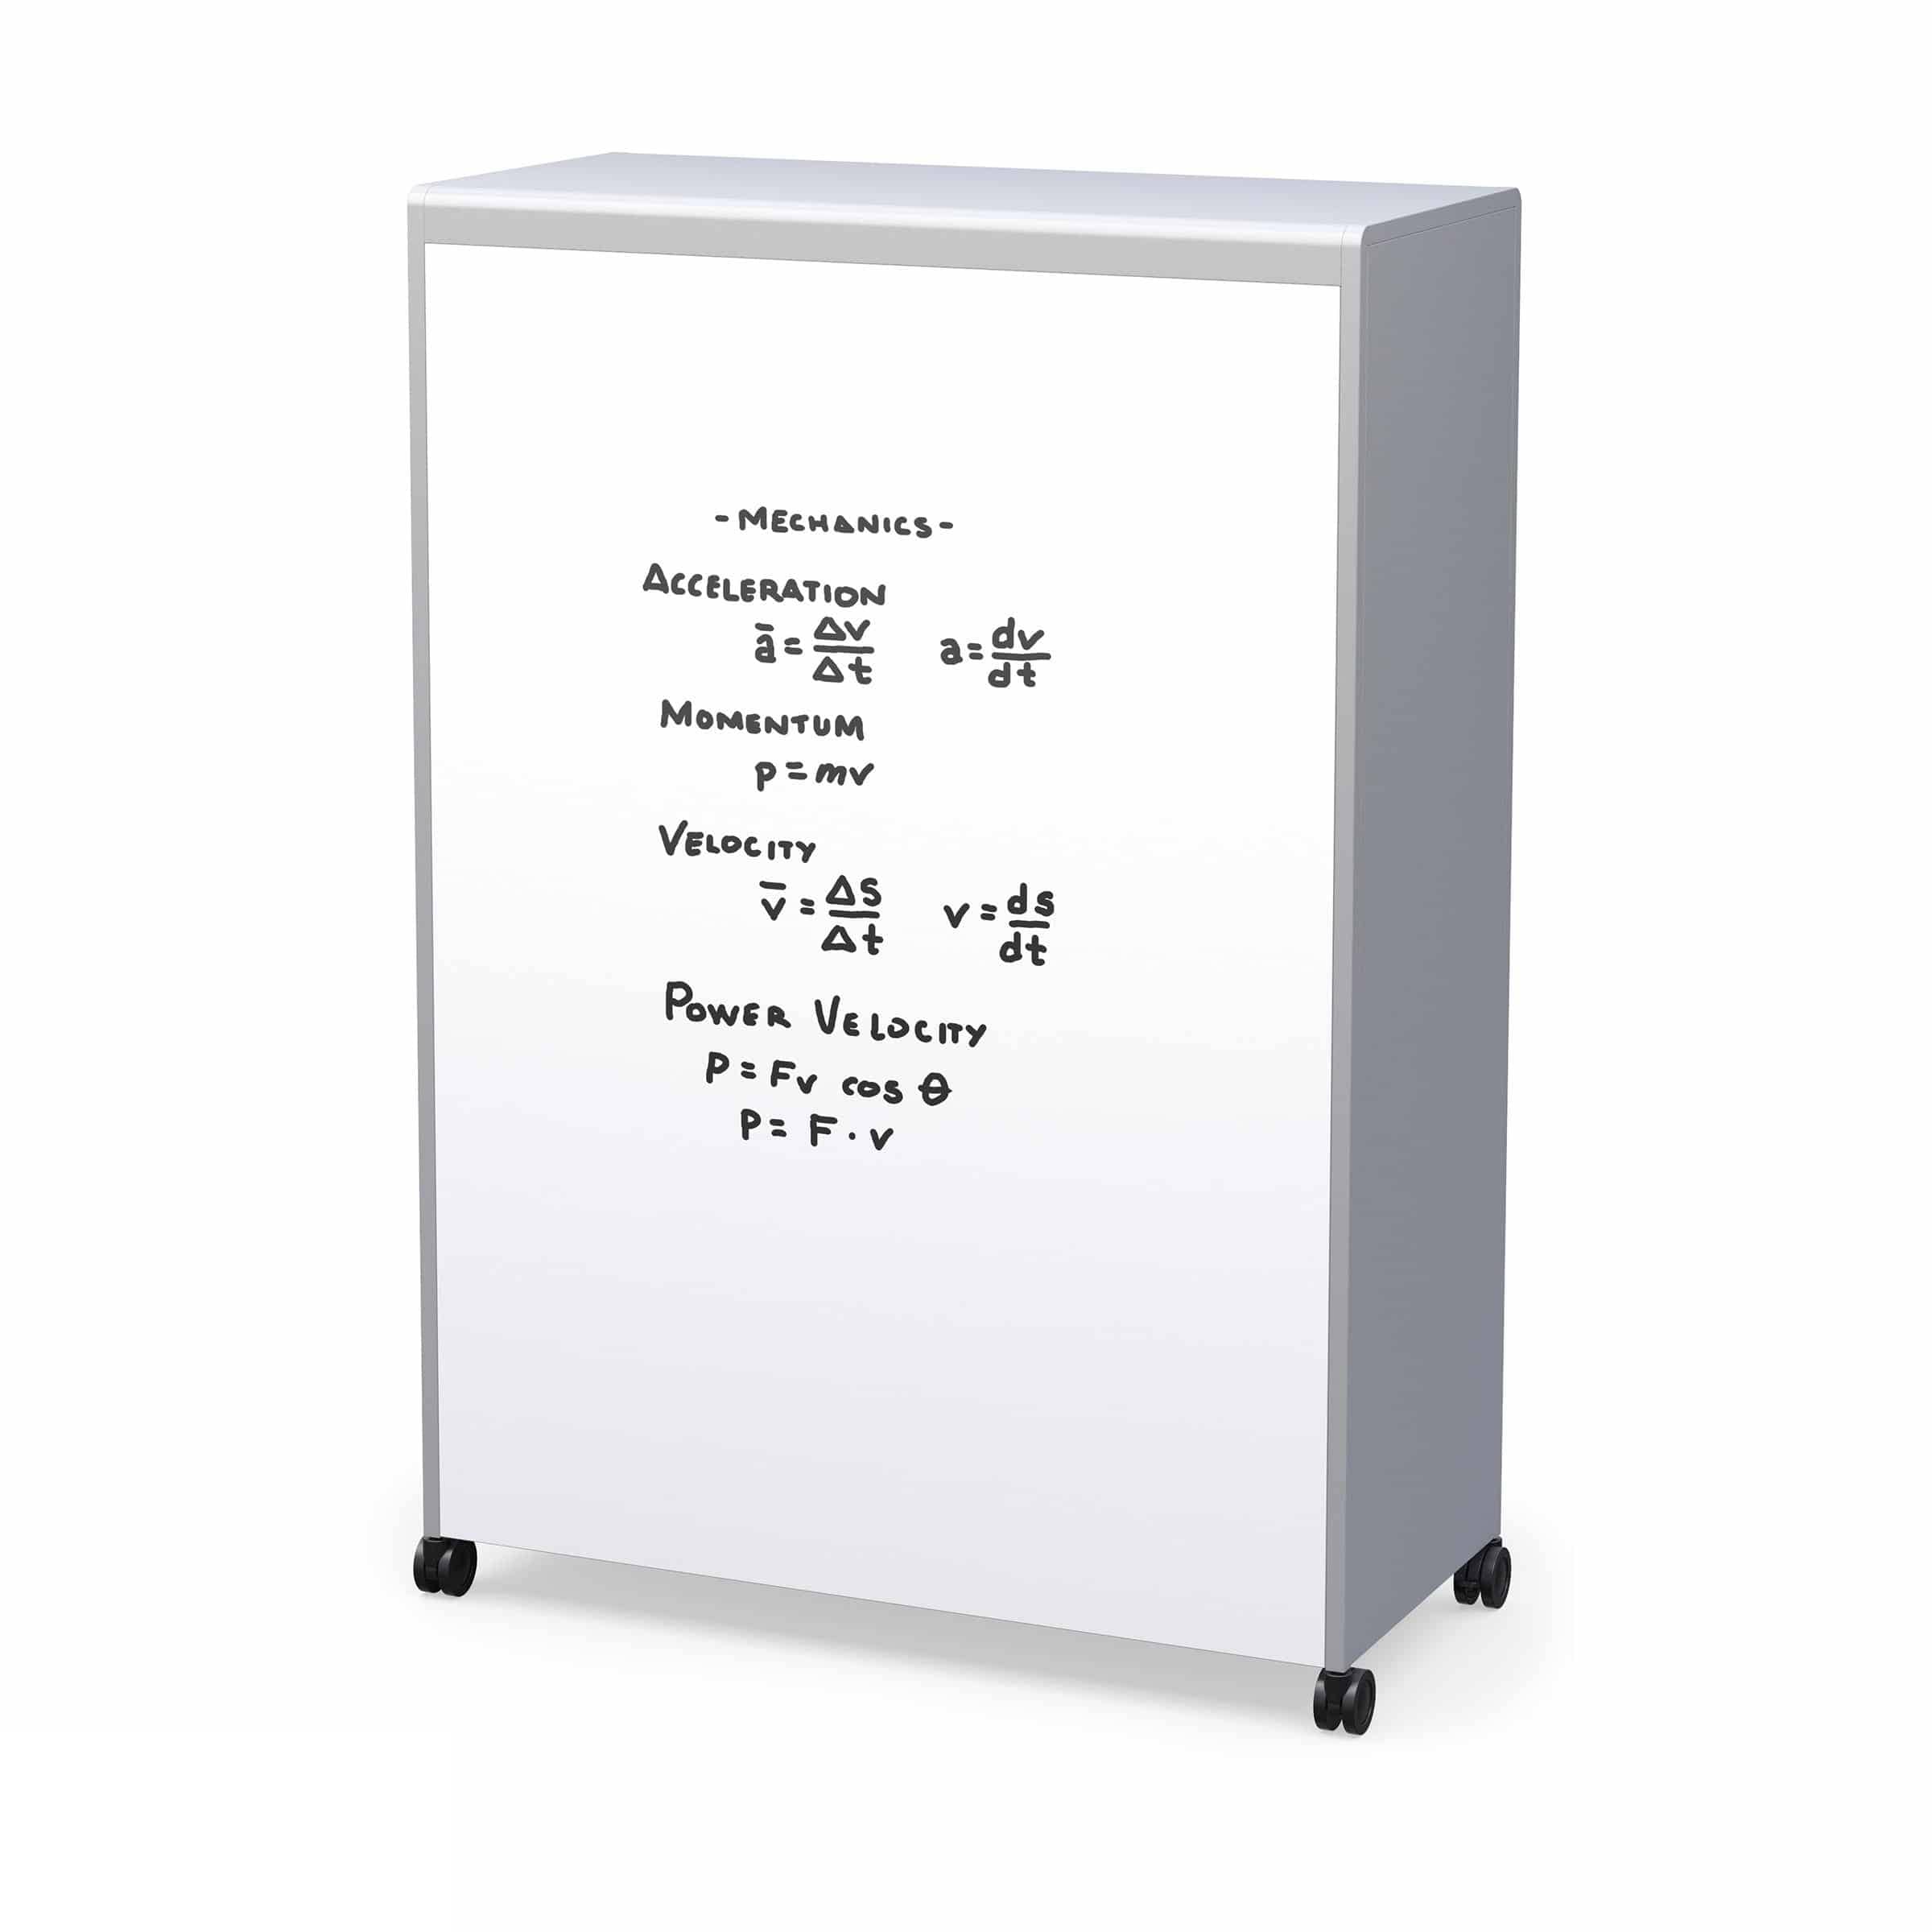 Voyager Tall Storage Cart with Bins - Haskell Education